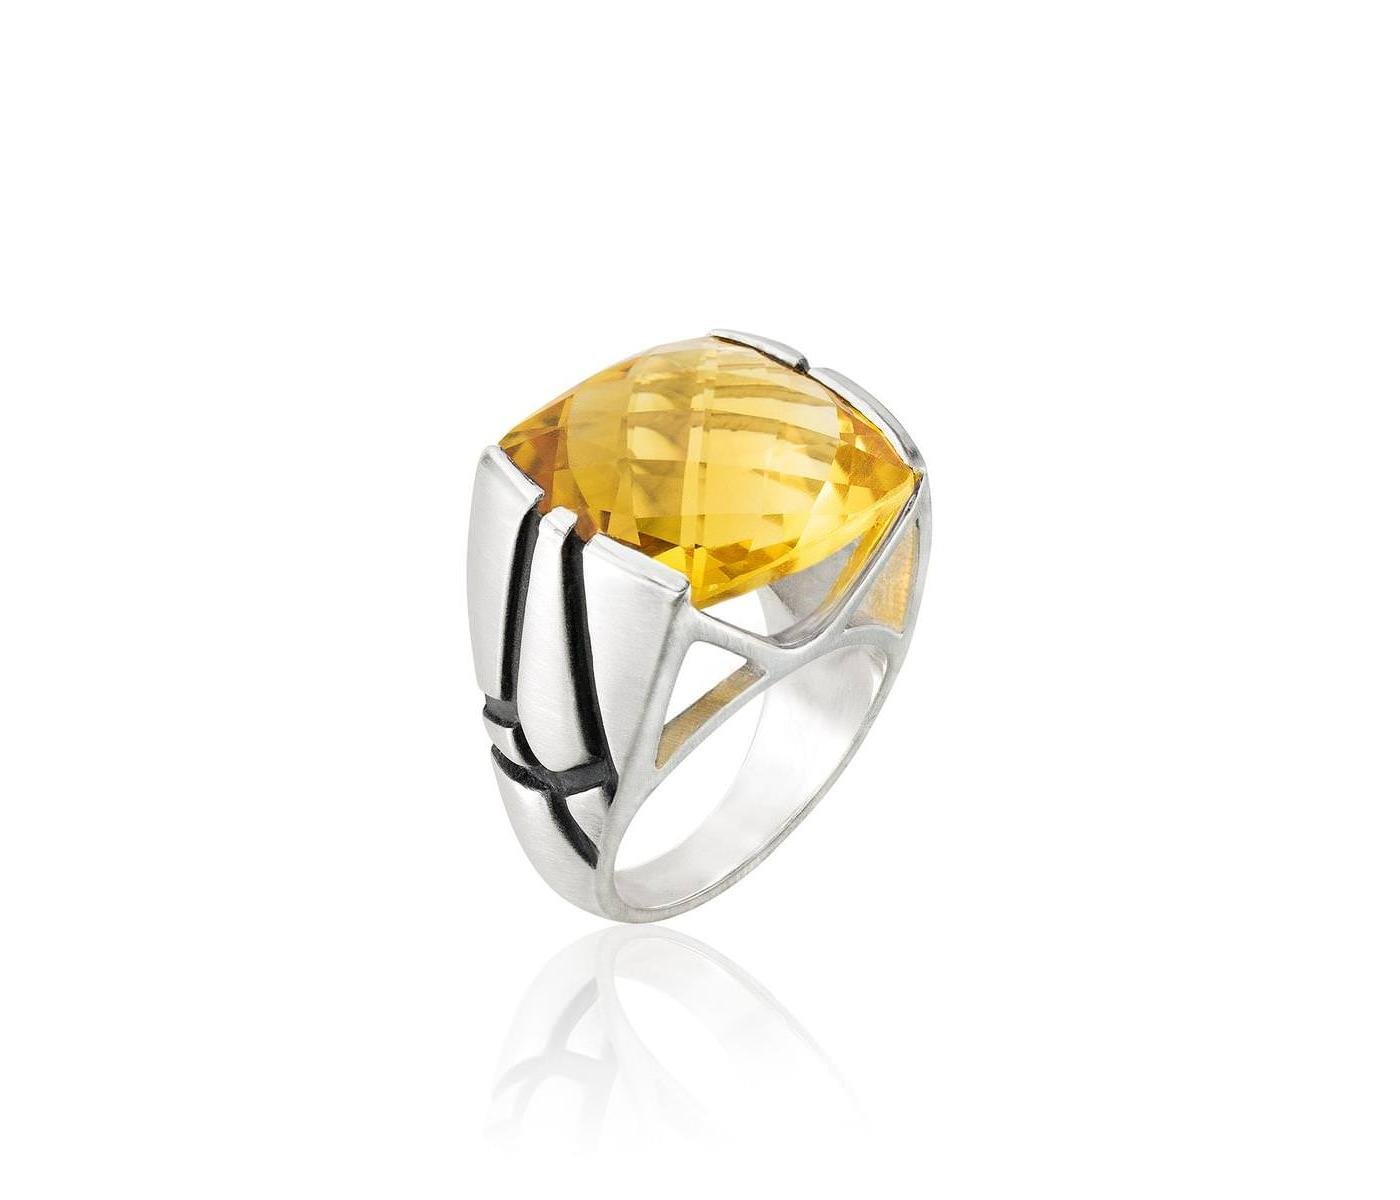 Ring by Marcia Budet